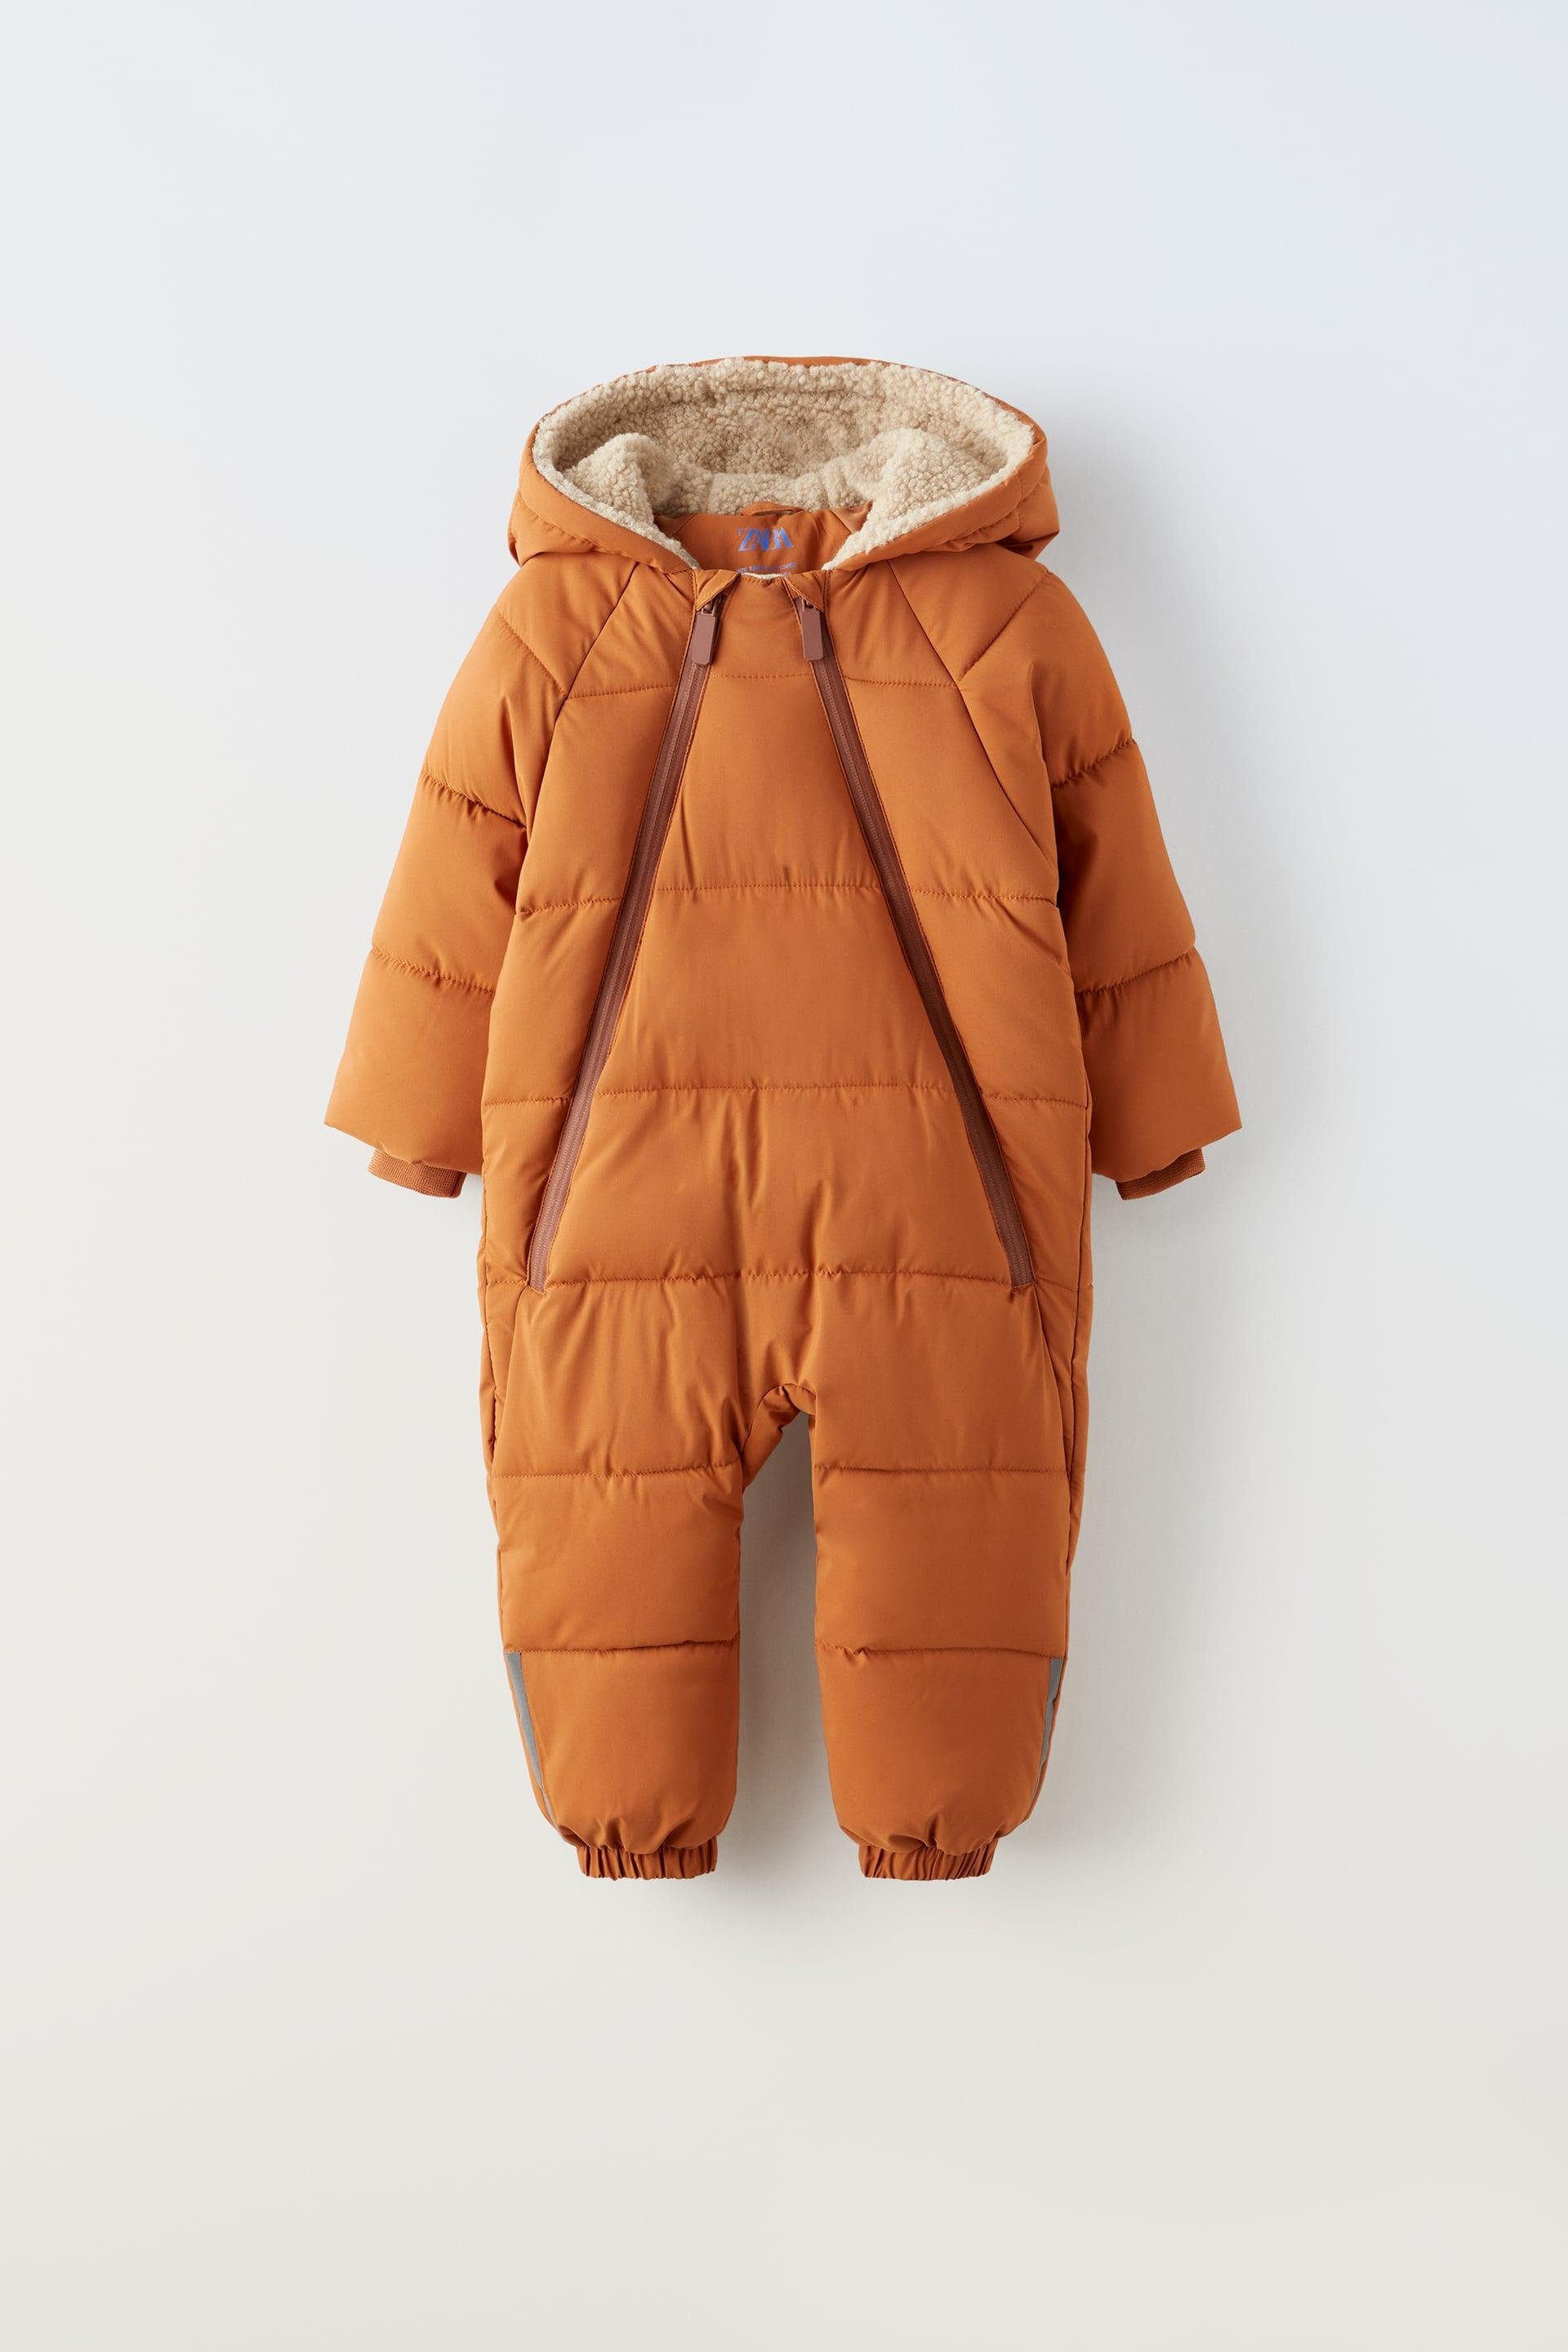 WATER REPELLENT AND WIND RESISTANT PADDED SNOW SUIT SKI COLLECTION by ZARA